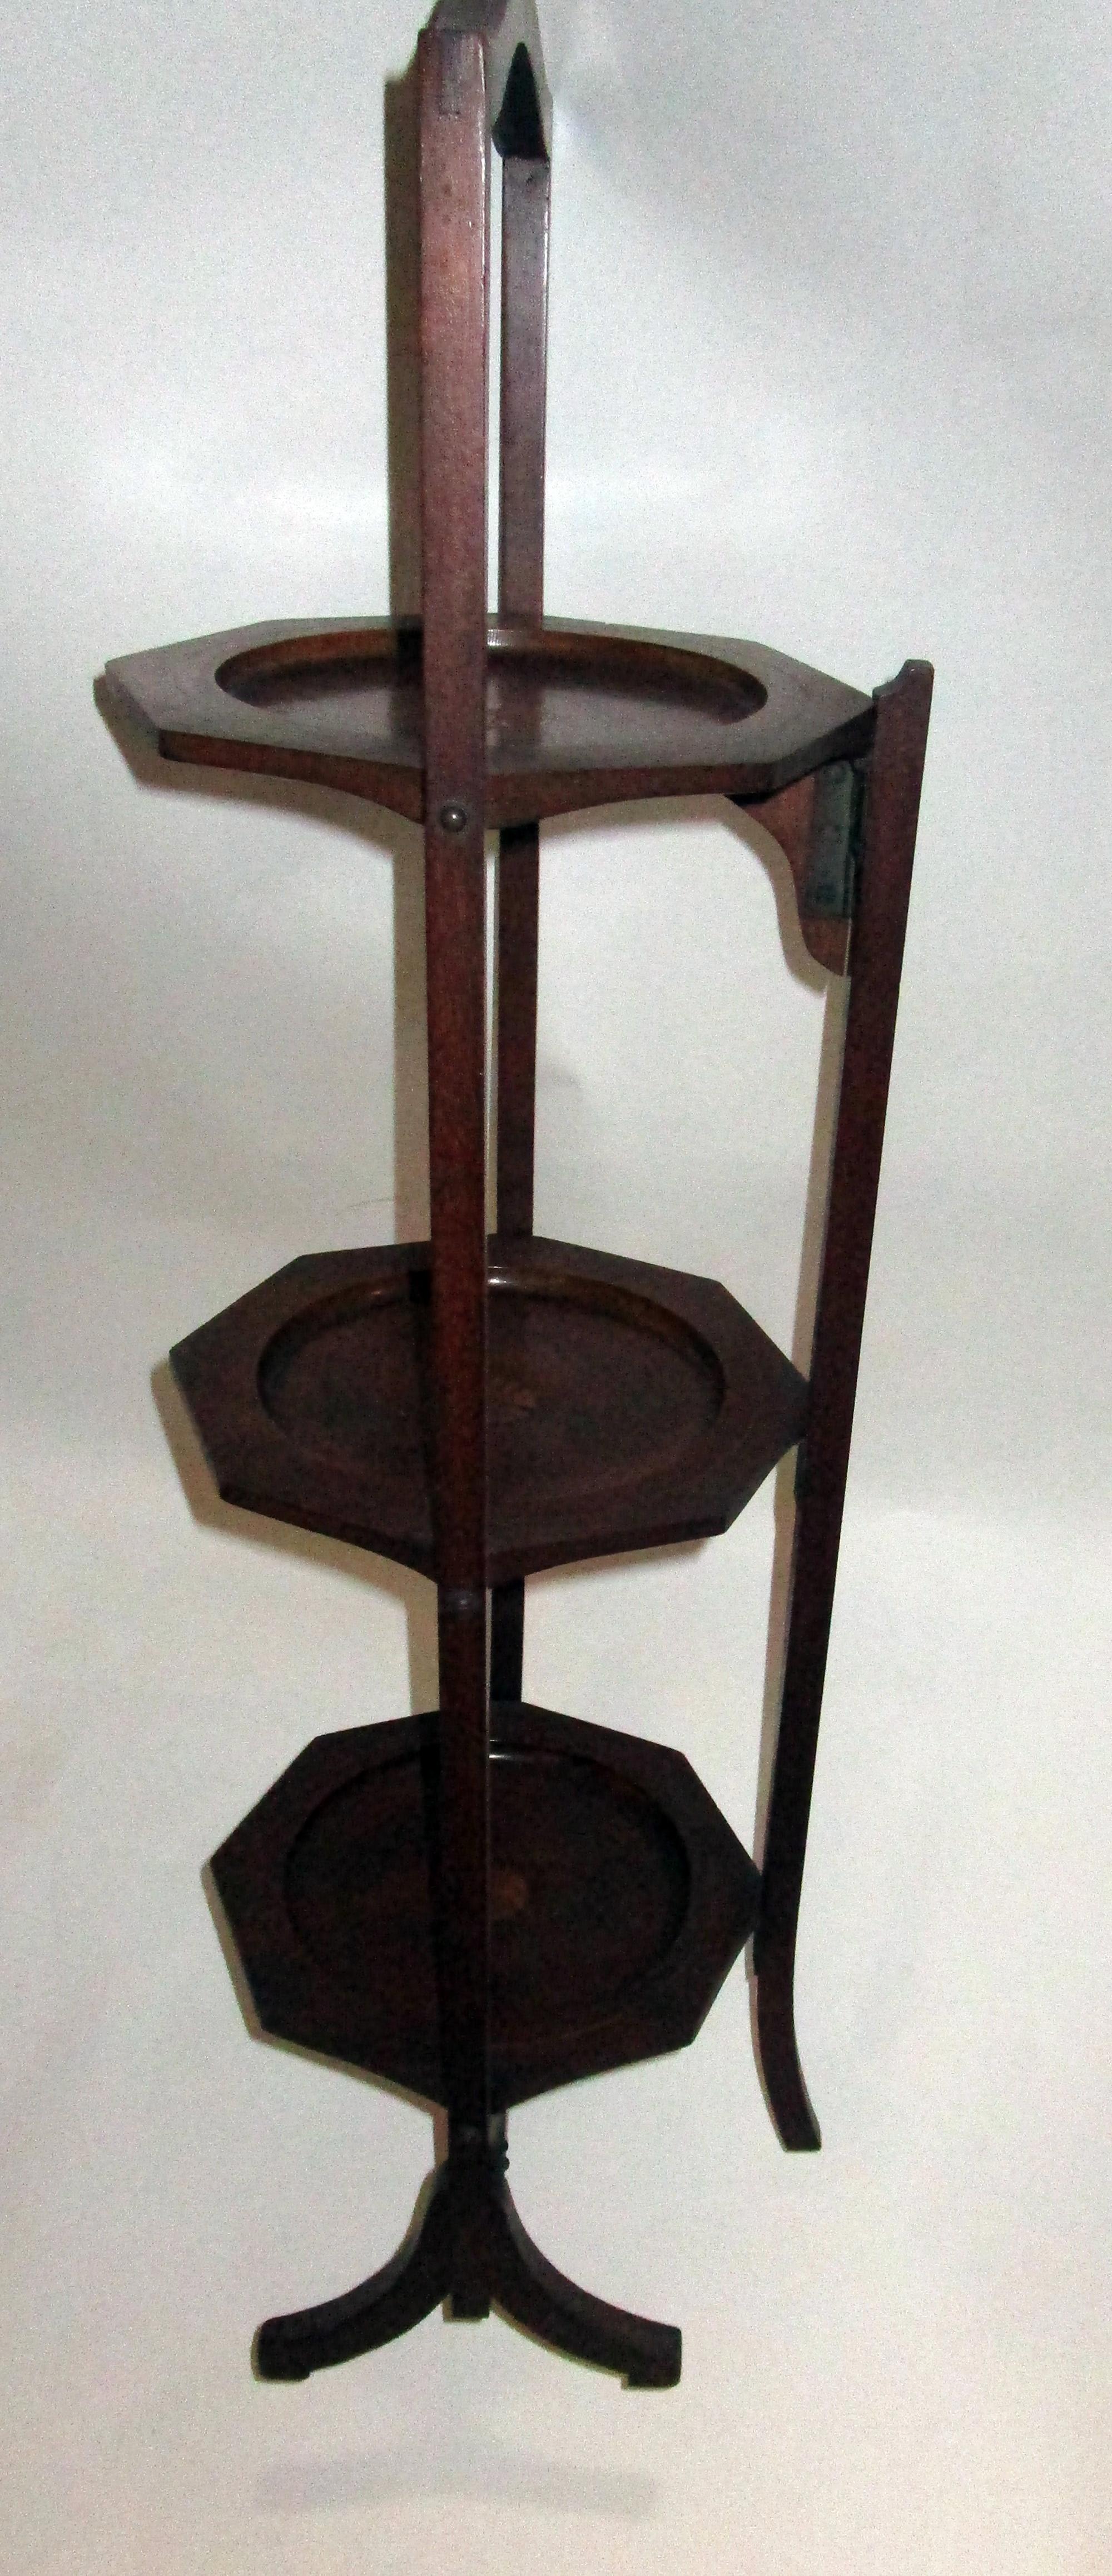 English 19th century Regency Mahogany Side Table or Muffin Stand